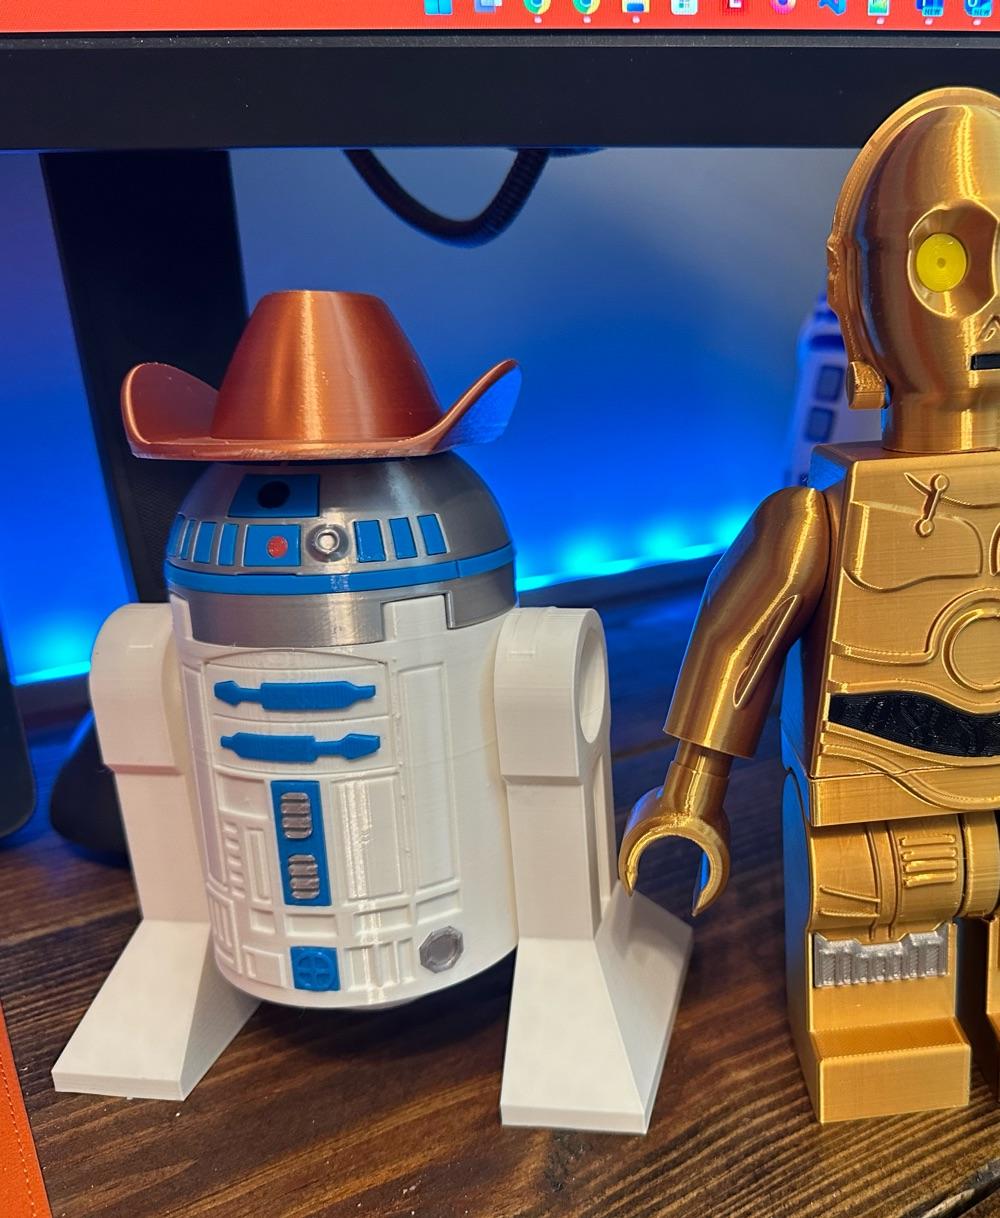 Hat Collection (6:1 LEGO-inspired brick figure hats) - R2how-D2 - 3d model